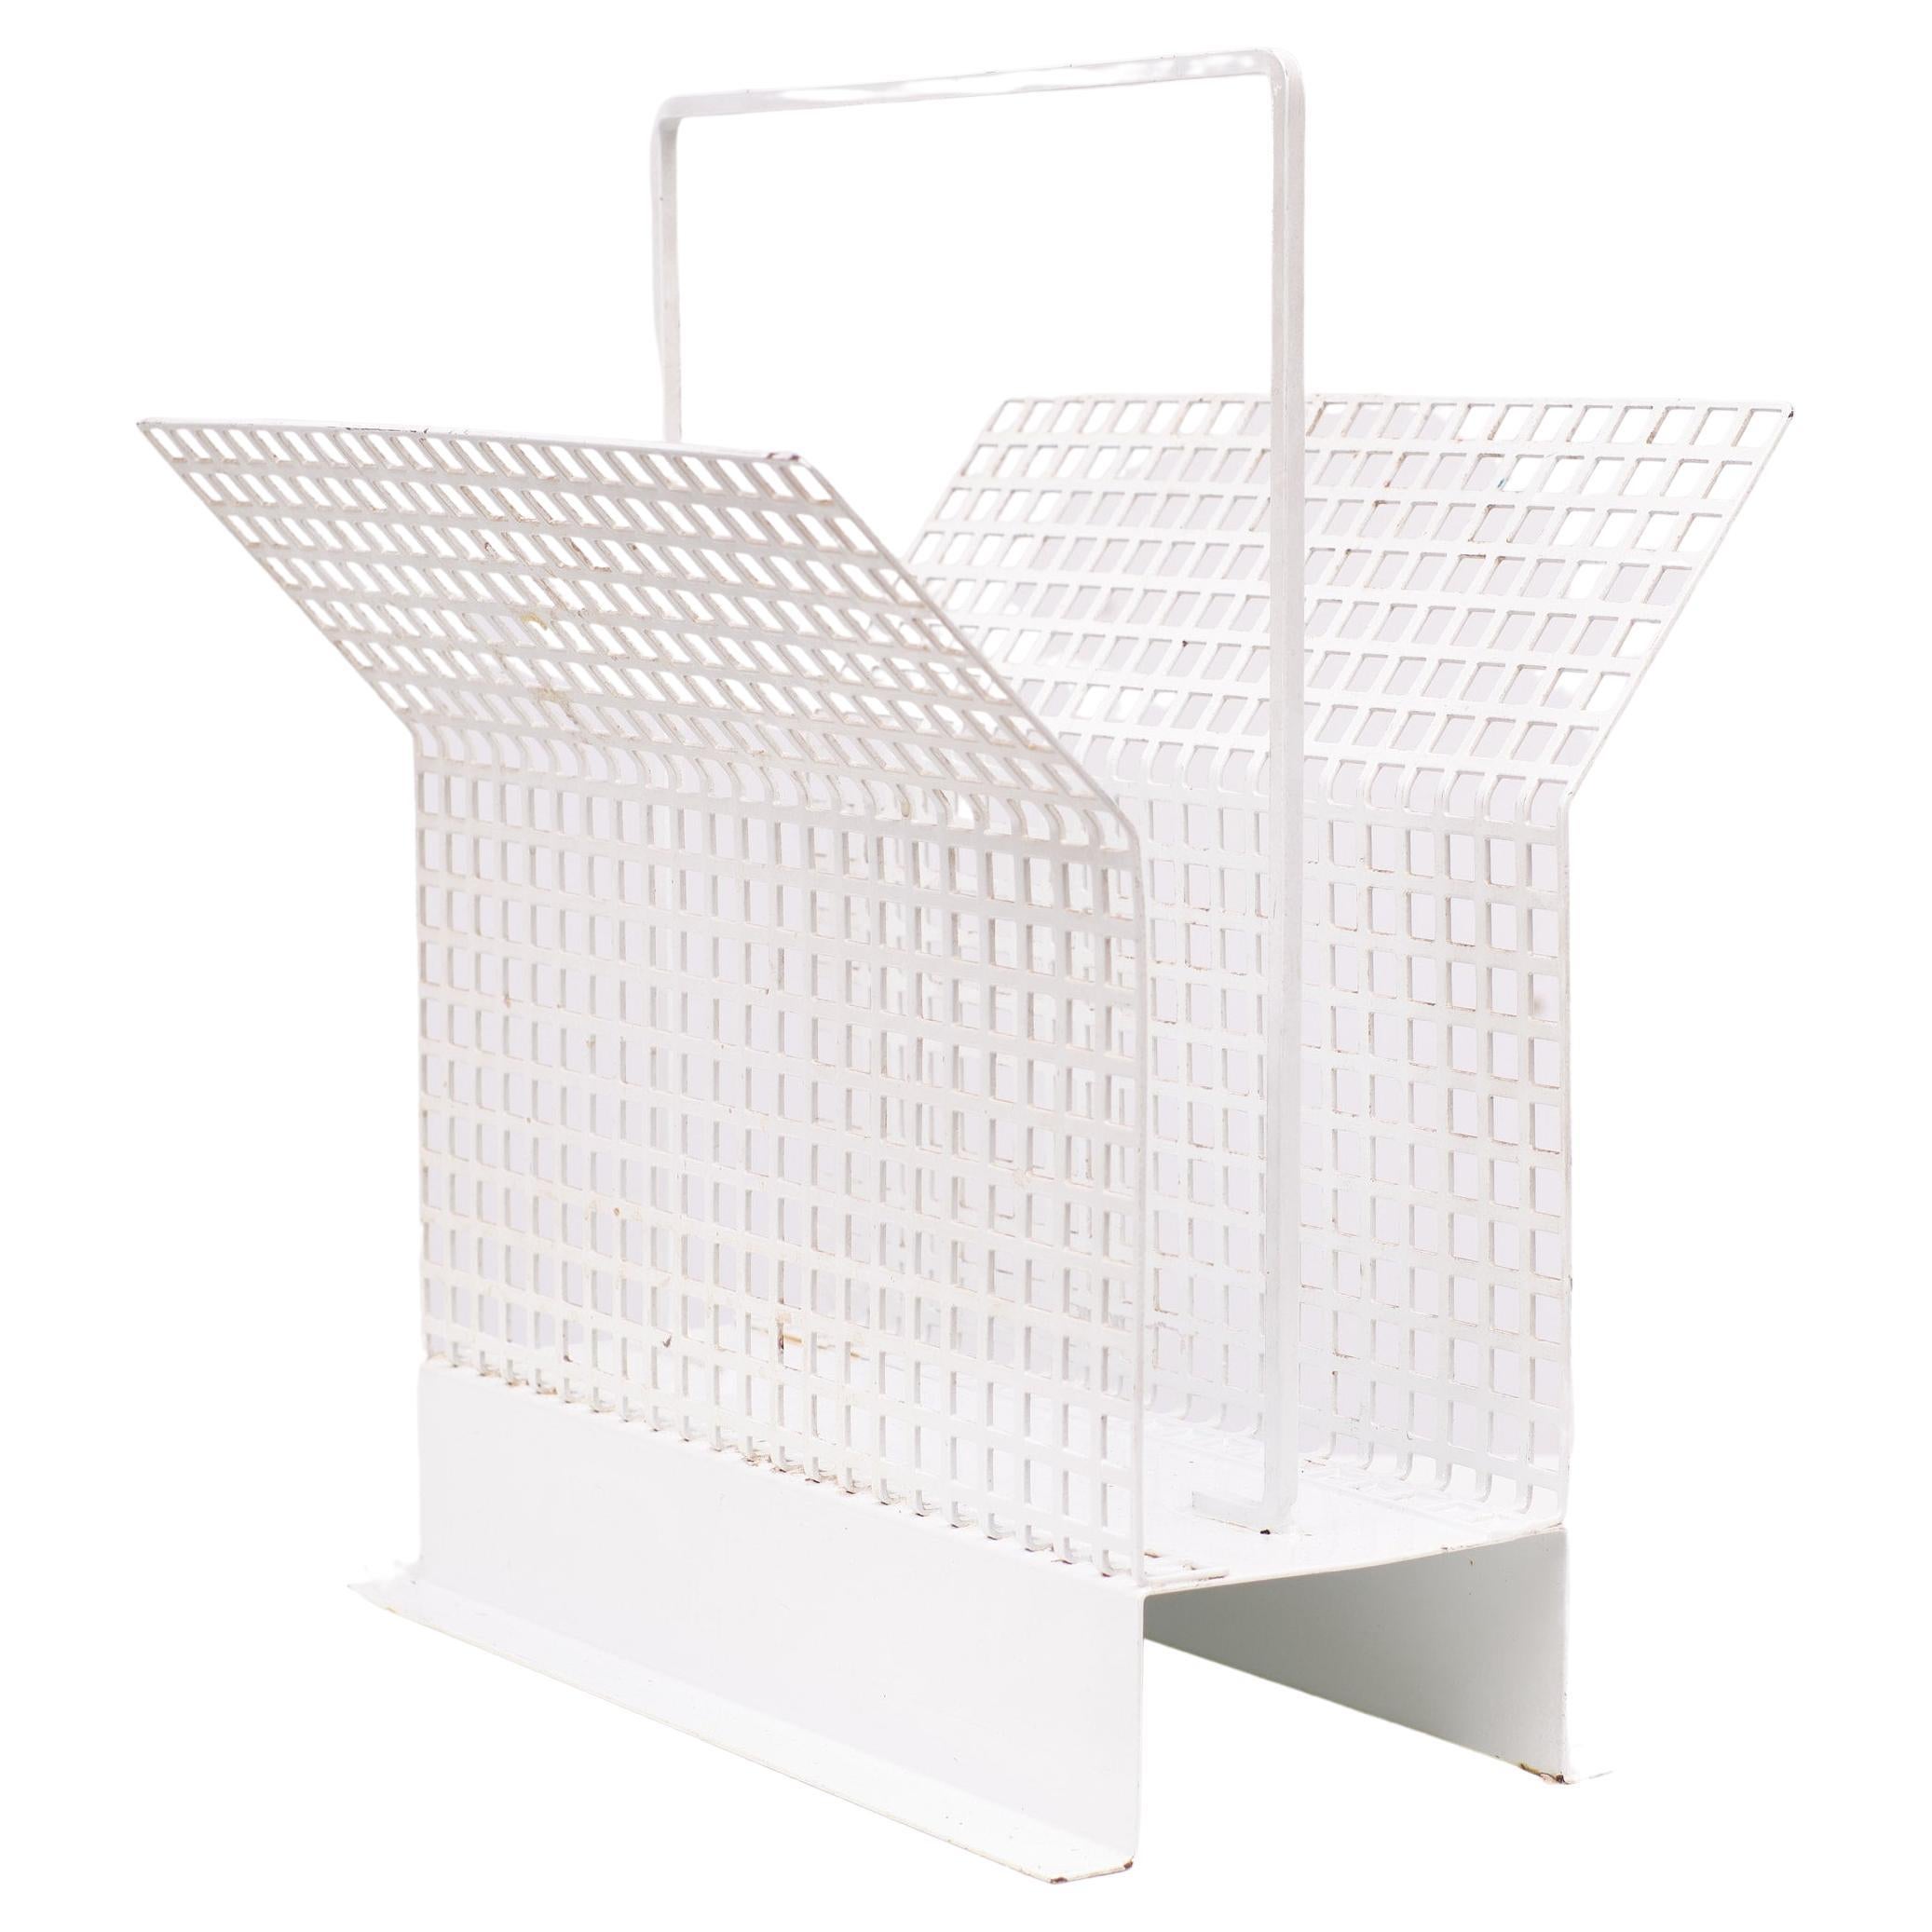 Perforated Metal News Paper Rack, 1960s, France For Sale